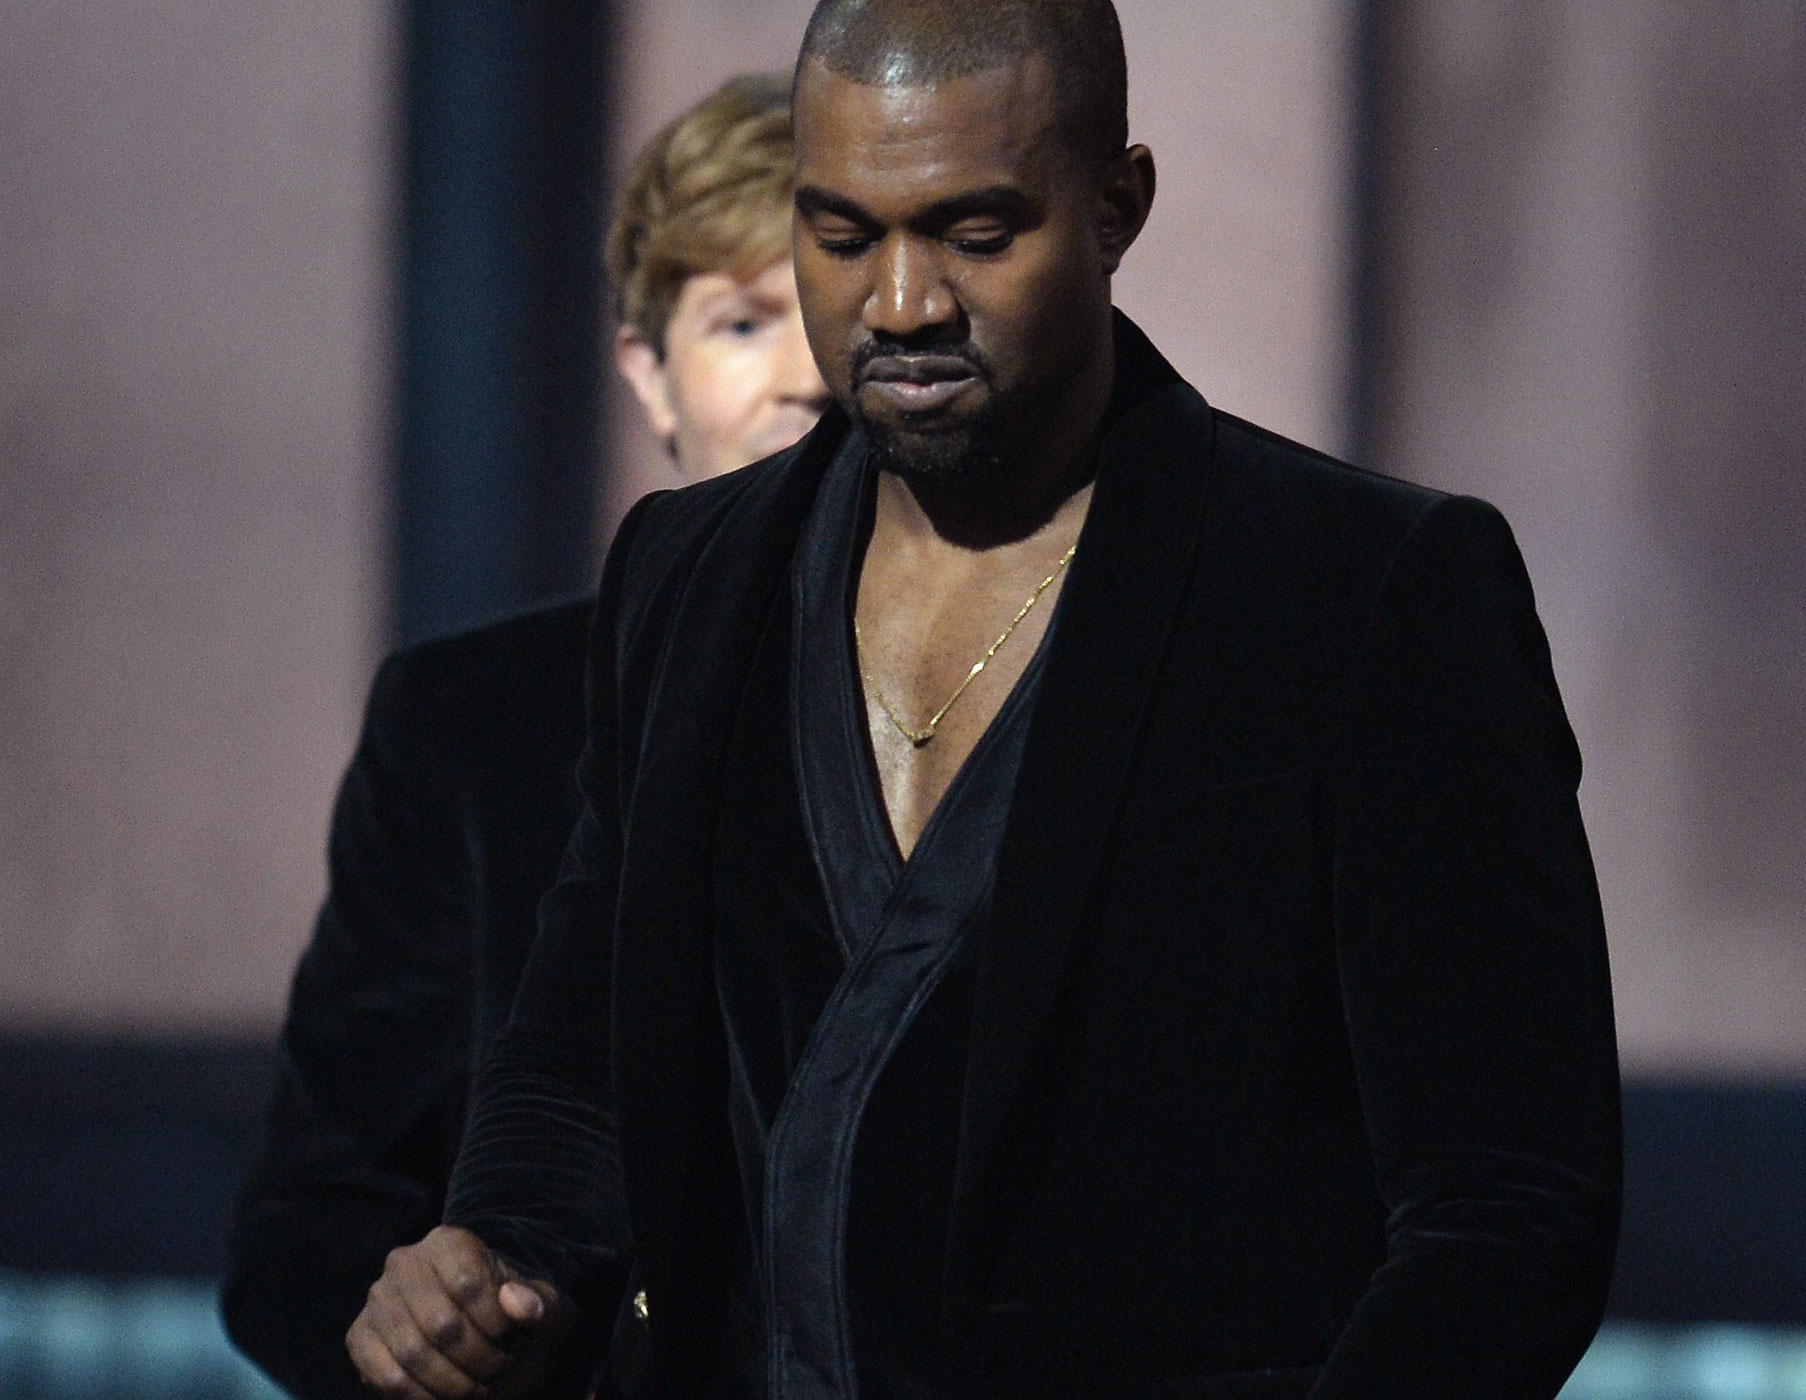 Winner for Album Of The Year Beck (background) reacts as Kanye West leaves the stage at the 57th Annual Grammy Awards in Los Angeles, Feb. 8, 2015. (Robyn Beck—AFP/Getty Images)